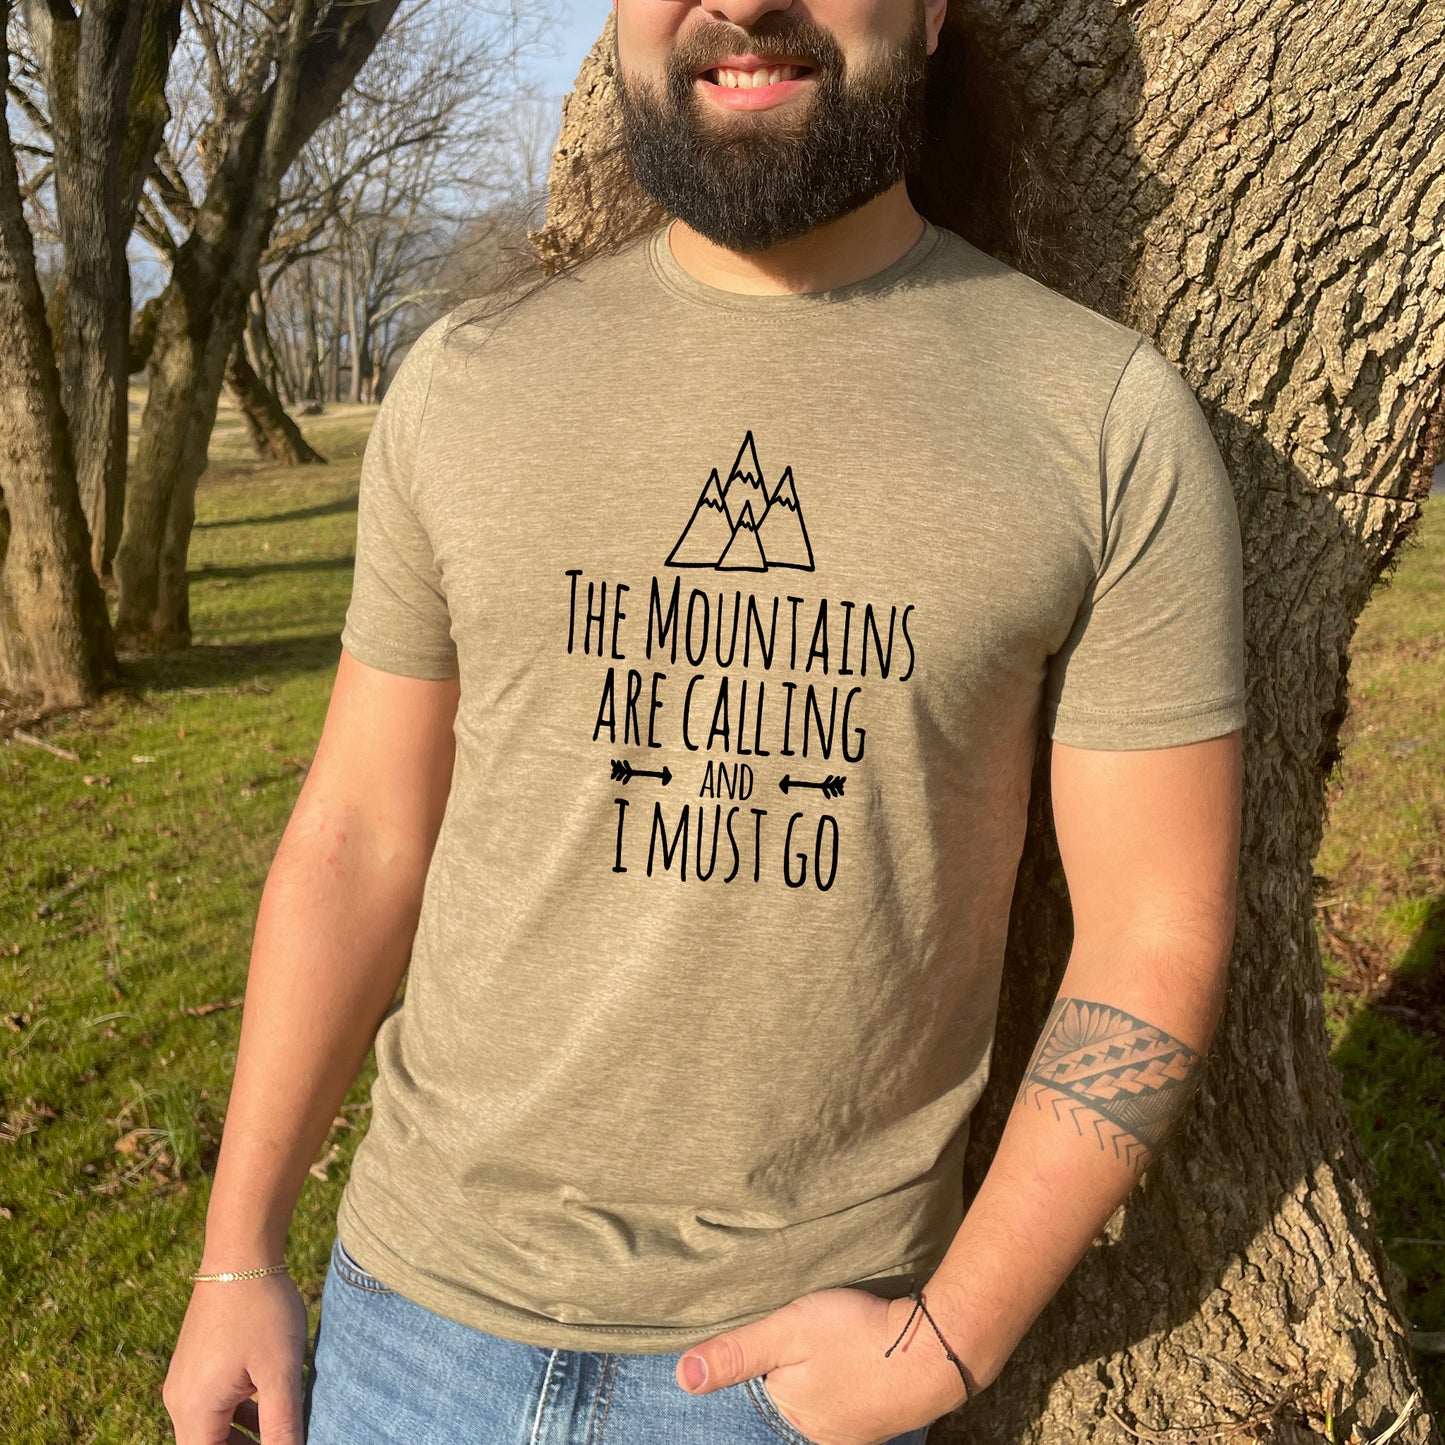 The Mountains Are Calling And I Must Go - Men's / Unisex Tee - Stonewash Blue or Sage